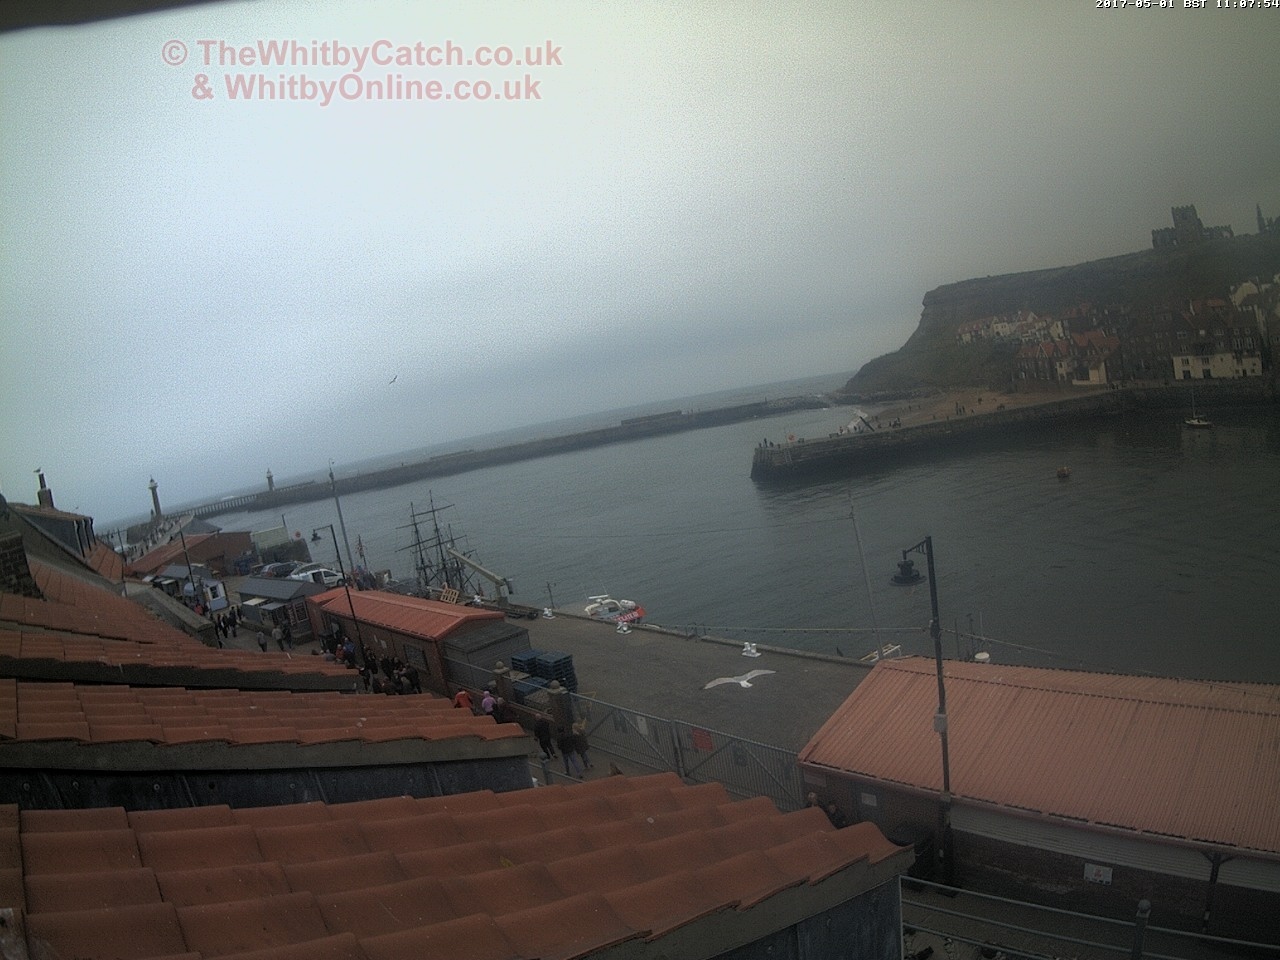 Whitby Mon 1st May 2017 11:08.